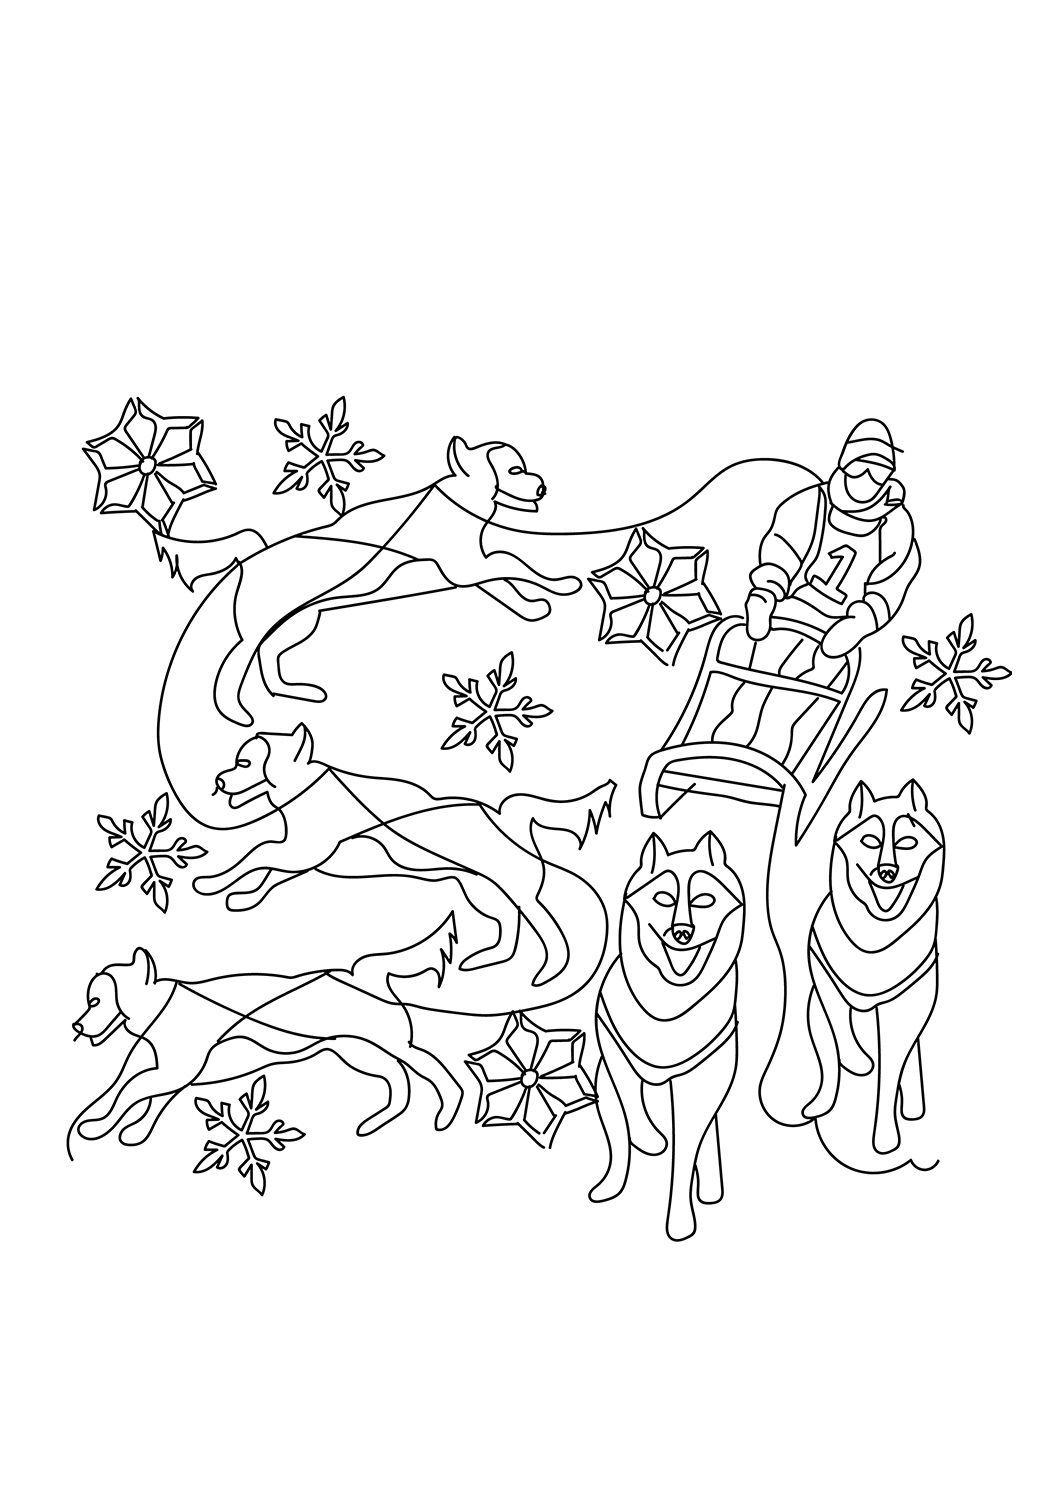 The Dog Sled Coloring Page - Free Coloring Pages Online